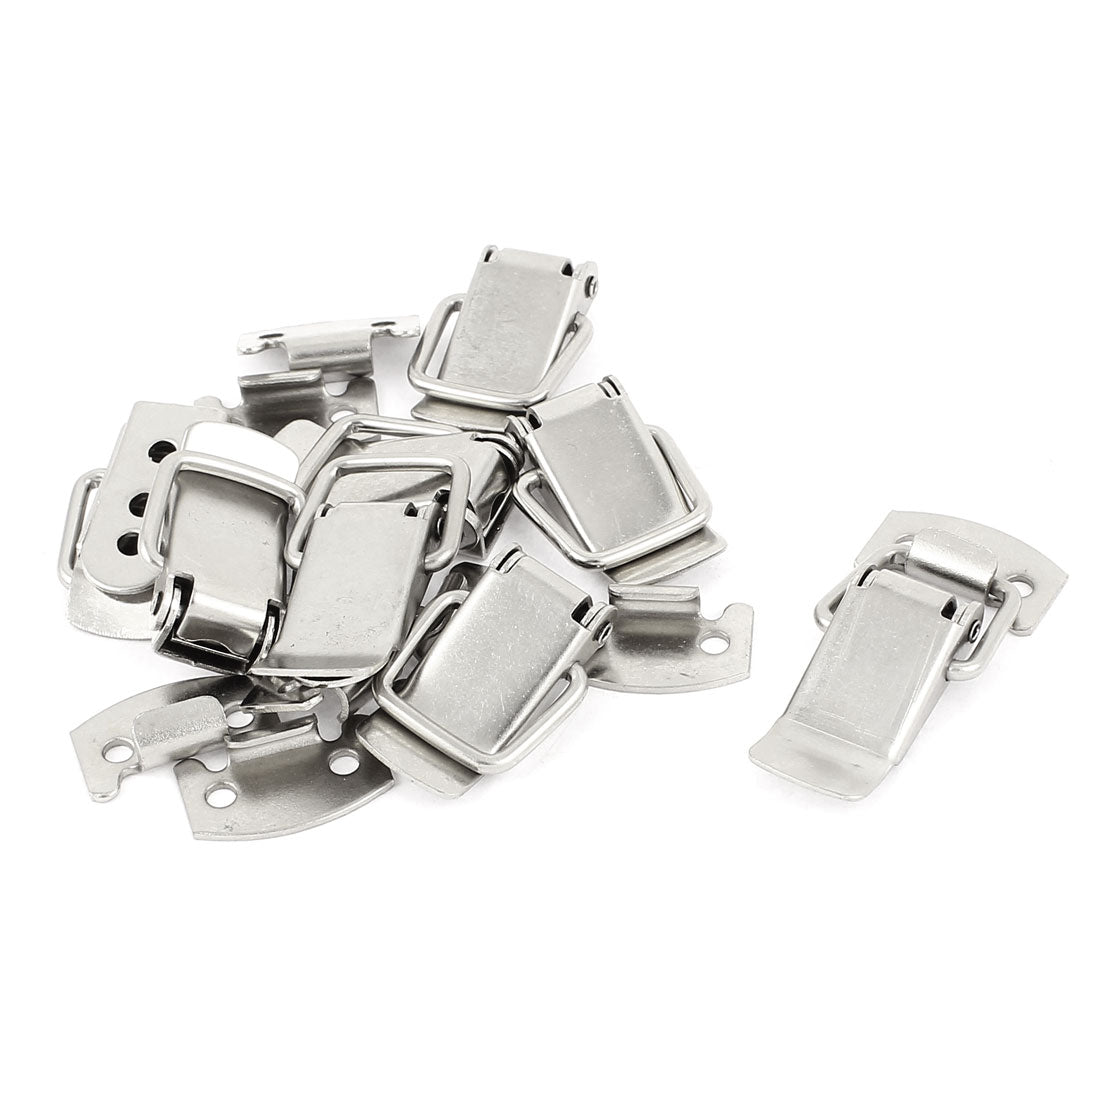 uxcell Uxcell 8 Pcs Silver Tone Toggle Latch Catch Set for Case Boxes Trunk Tool Box Suitcase